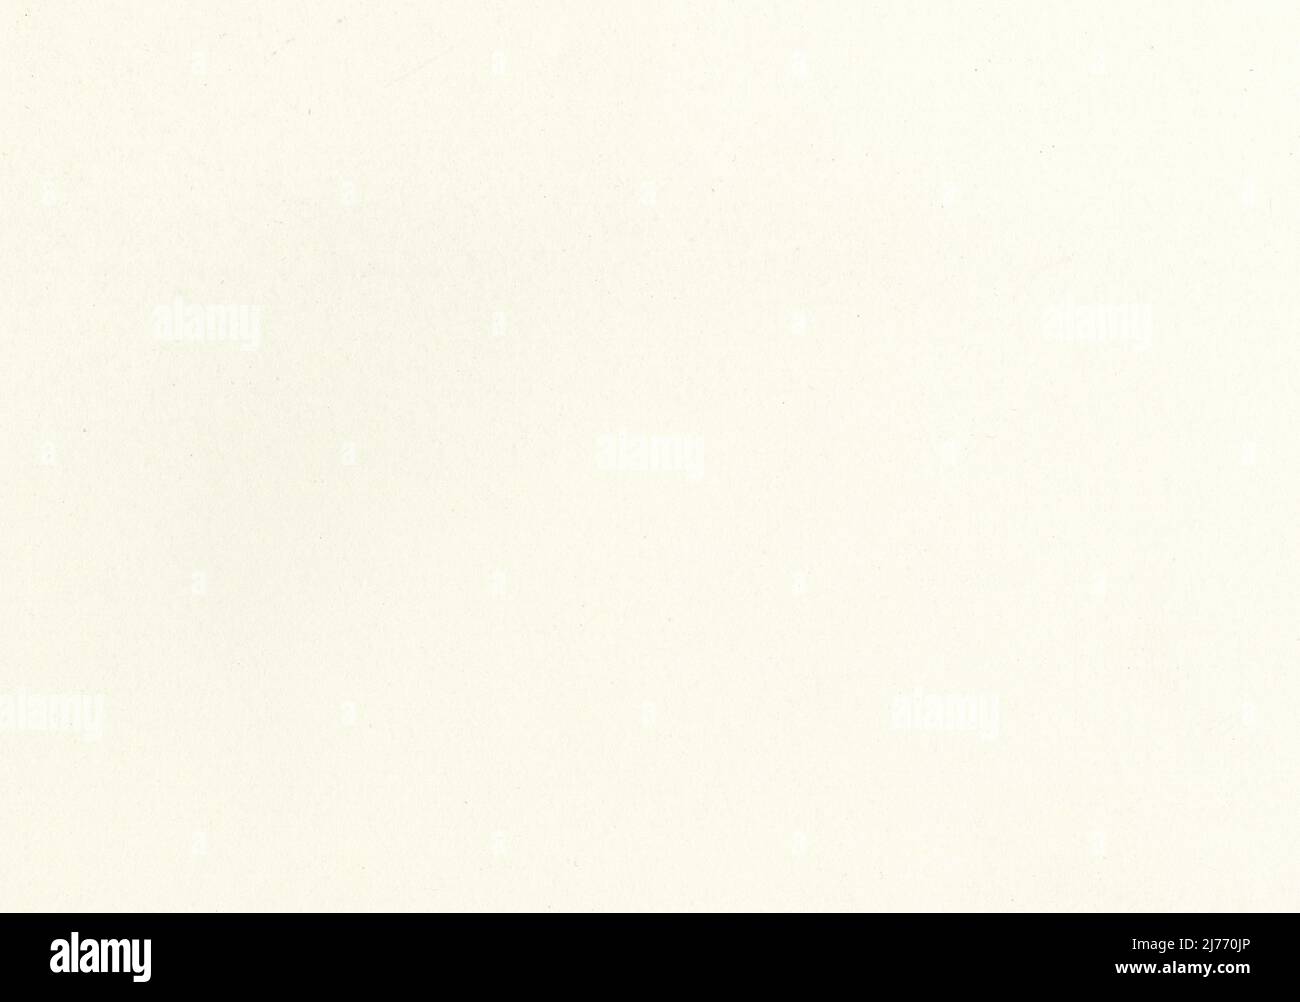 High resolution old light beige paper texture background scan with fine  grain fiber and dust particles smooth uncoated aged paper for wallpapers  and m Stock Photo - Alamy